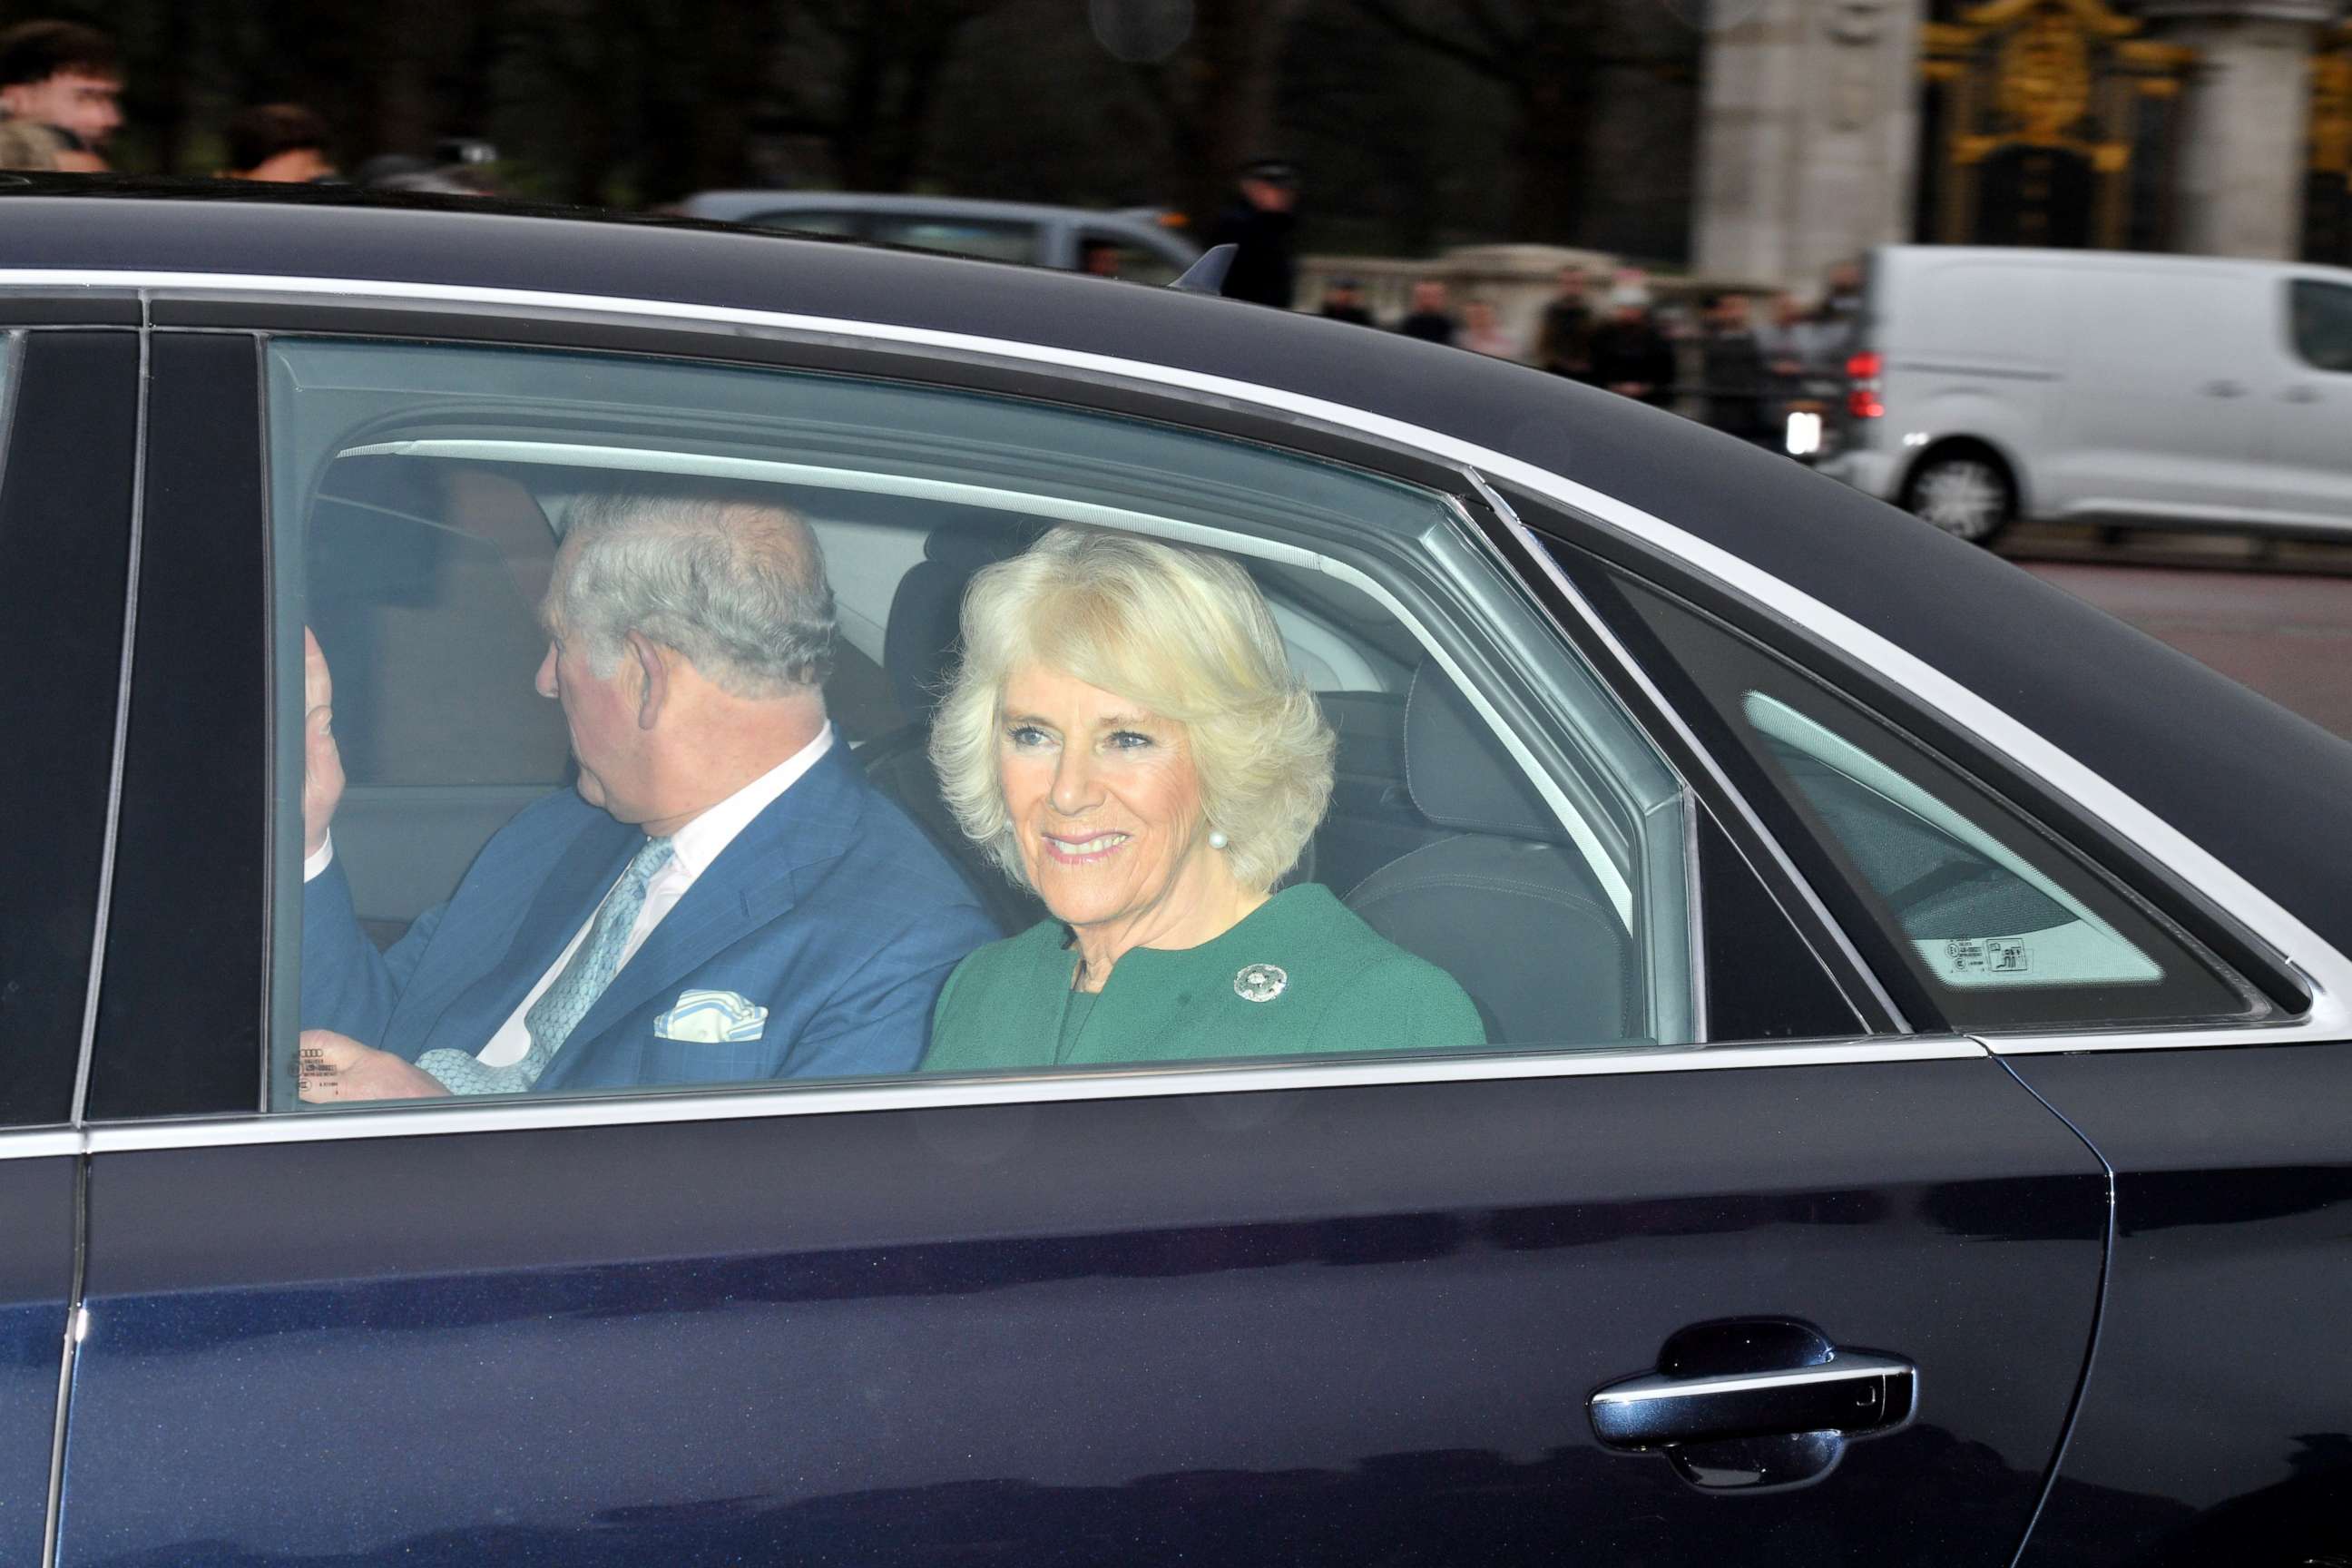 PHOTO: Prince Charles and Camilla Duchess of Cornwall arrive at the Royal Christmas lunch at Buckingham Palace in London, Dec. 20, 2017.